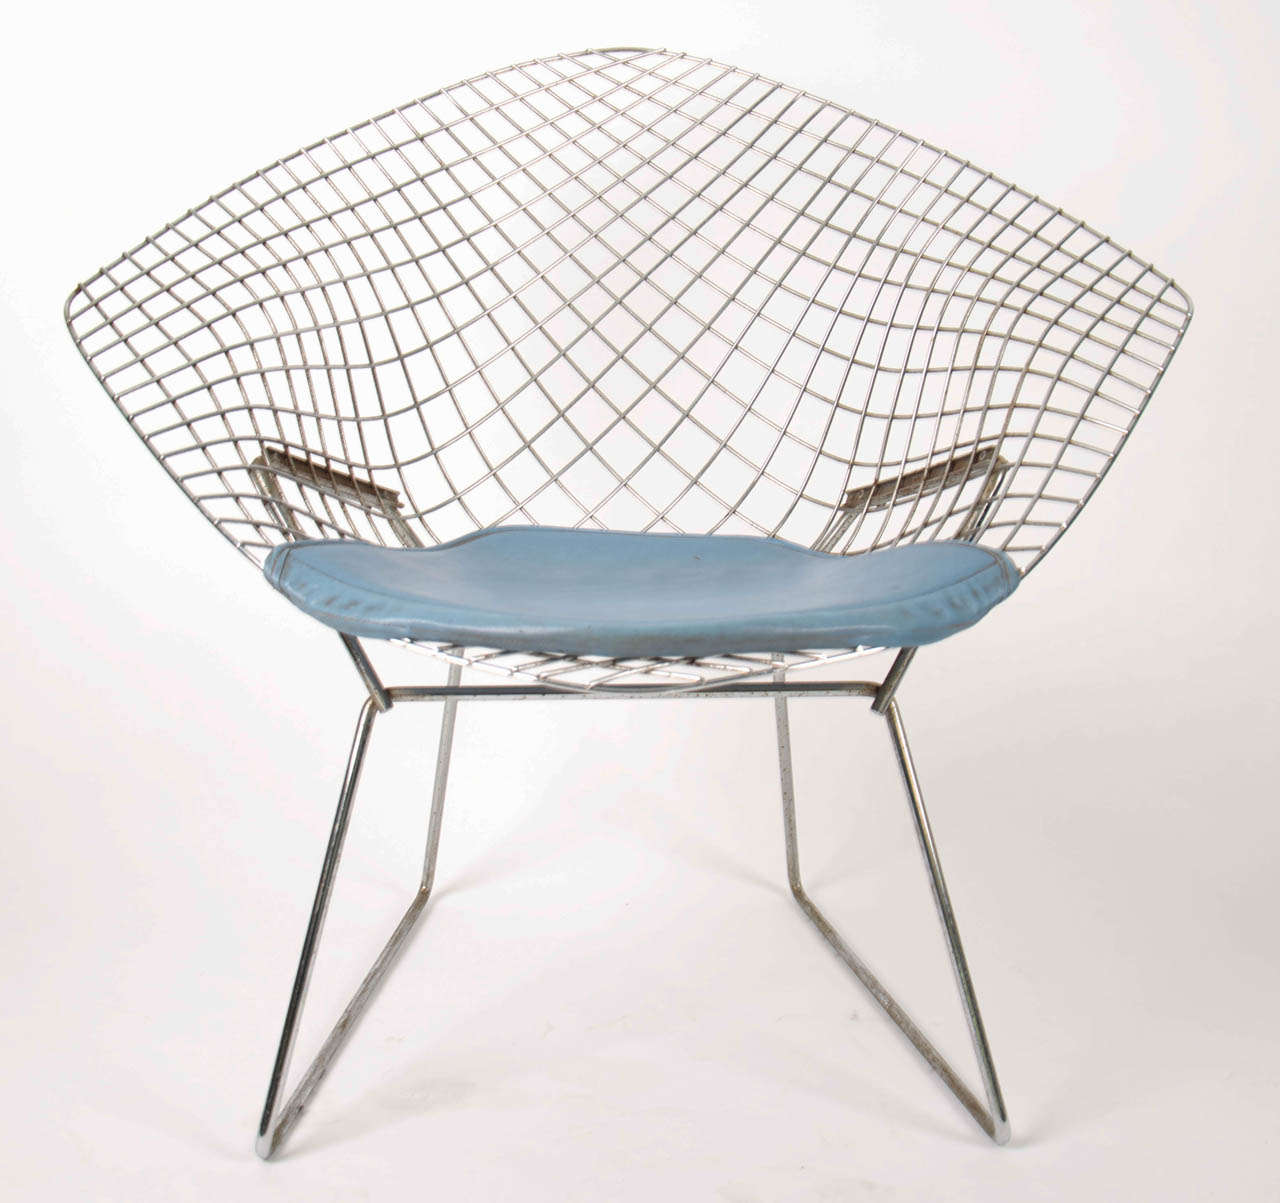 An authentic Harry Bertoia Diamond Chair 1950 with original upholstery seating,
manufactured by Knoll.
Chrome-plated, bent and welded steel rod construction.